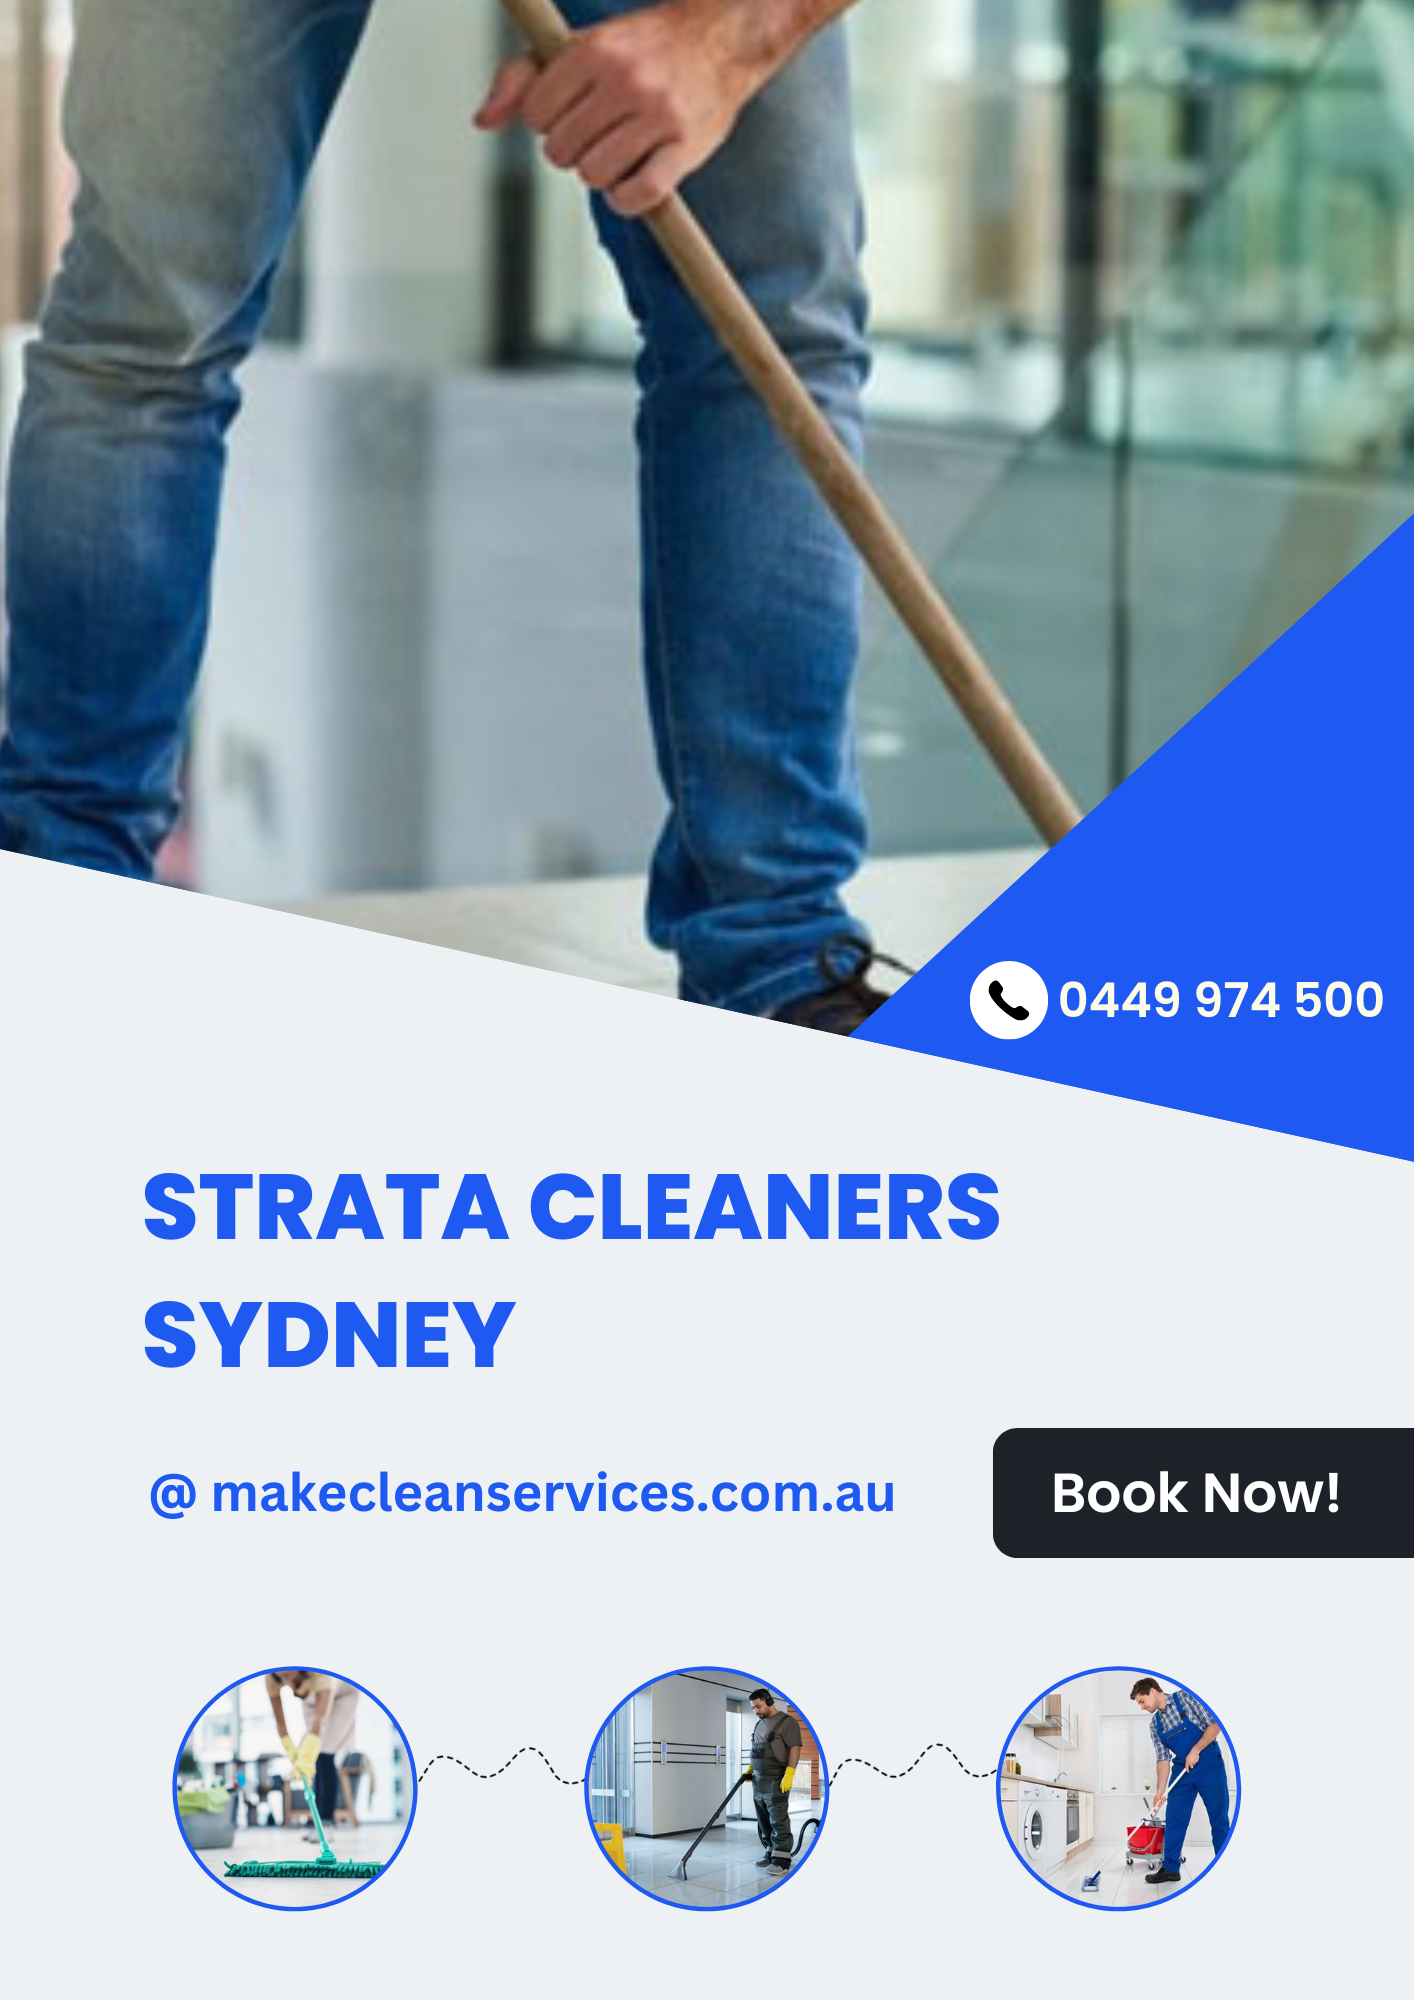 Strata Cleaners Sydney